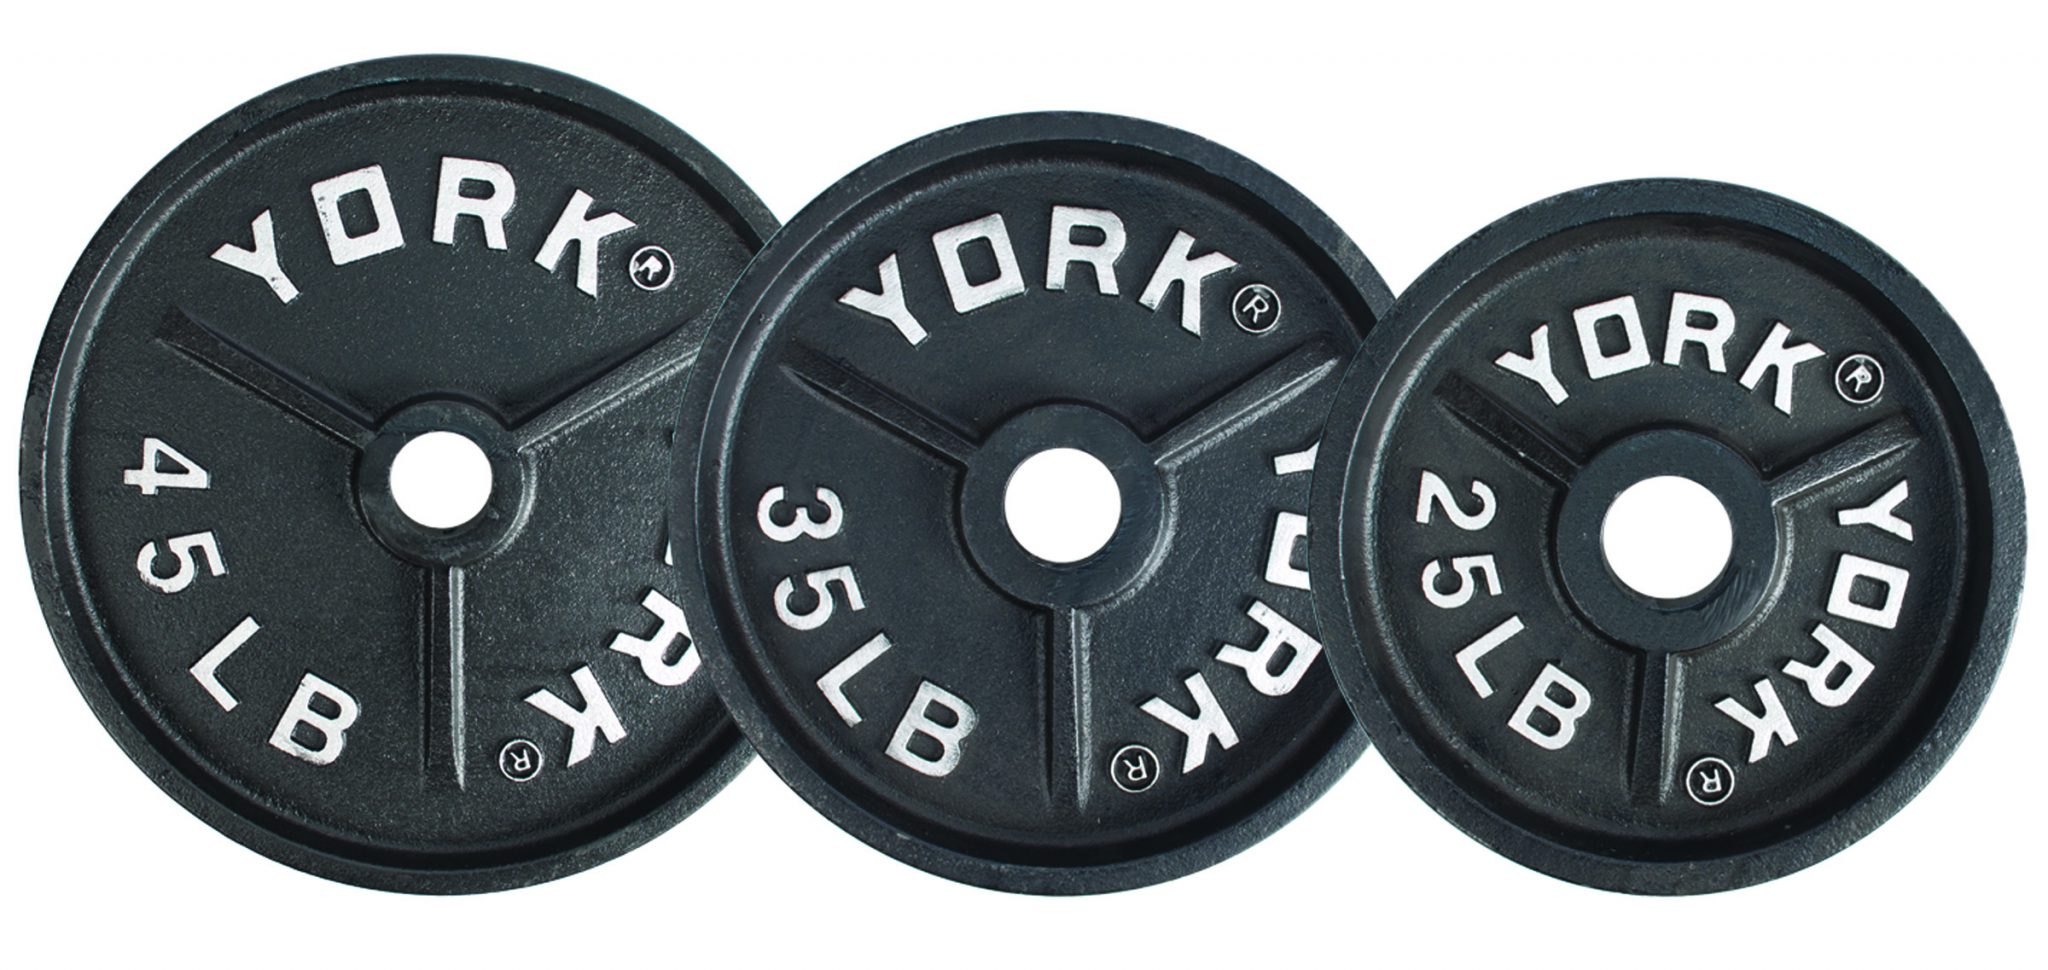 35 lb Olympic Weight Plates.PAIR OF FITNESS GEAR 35 LB OLYMPIC GRIP PLATES. 2 